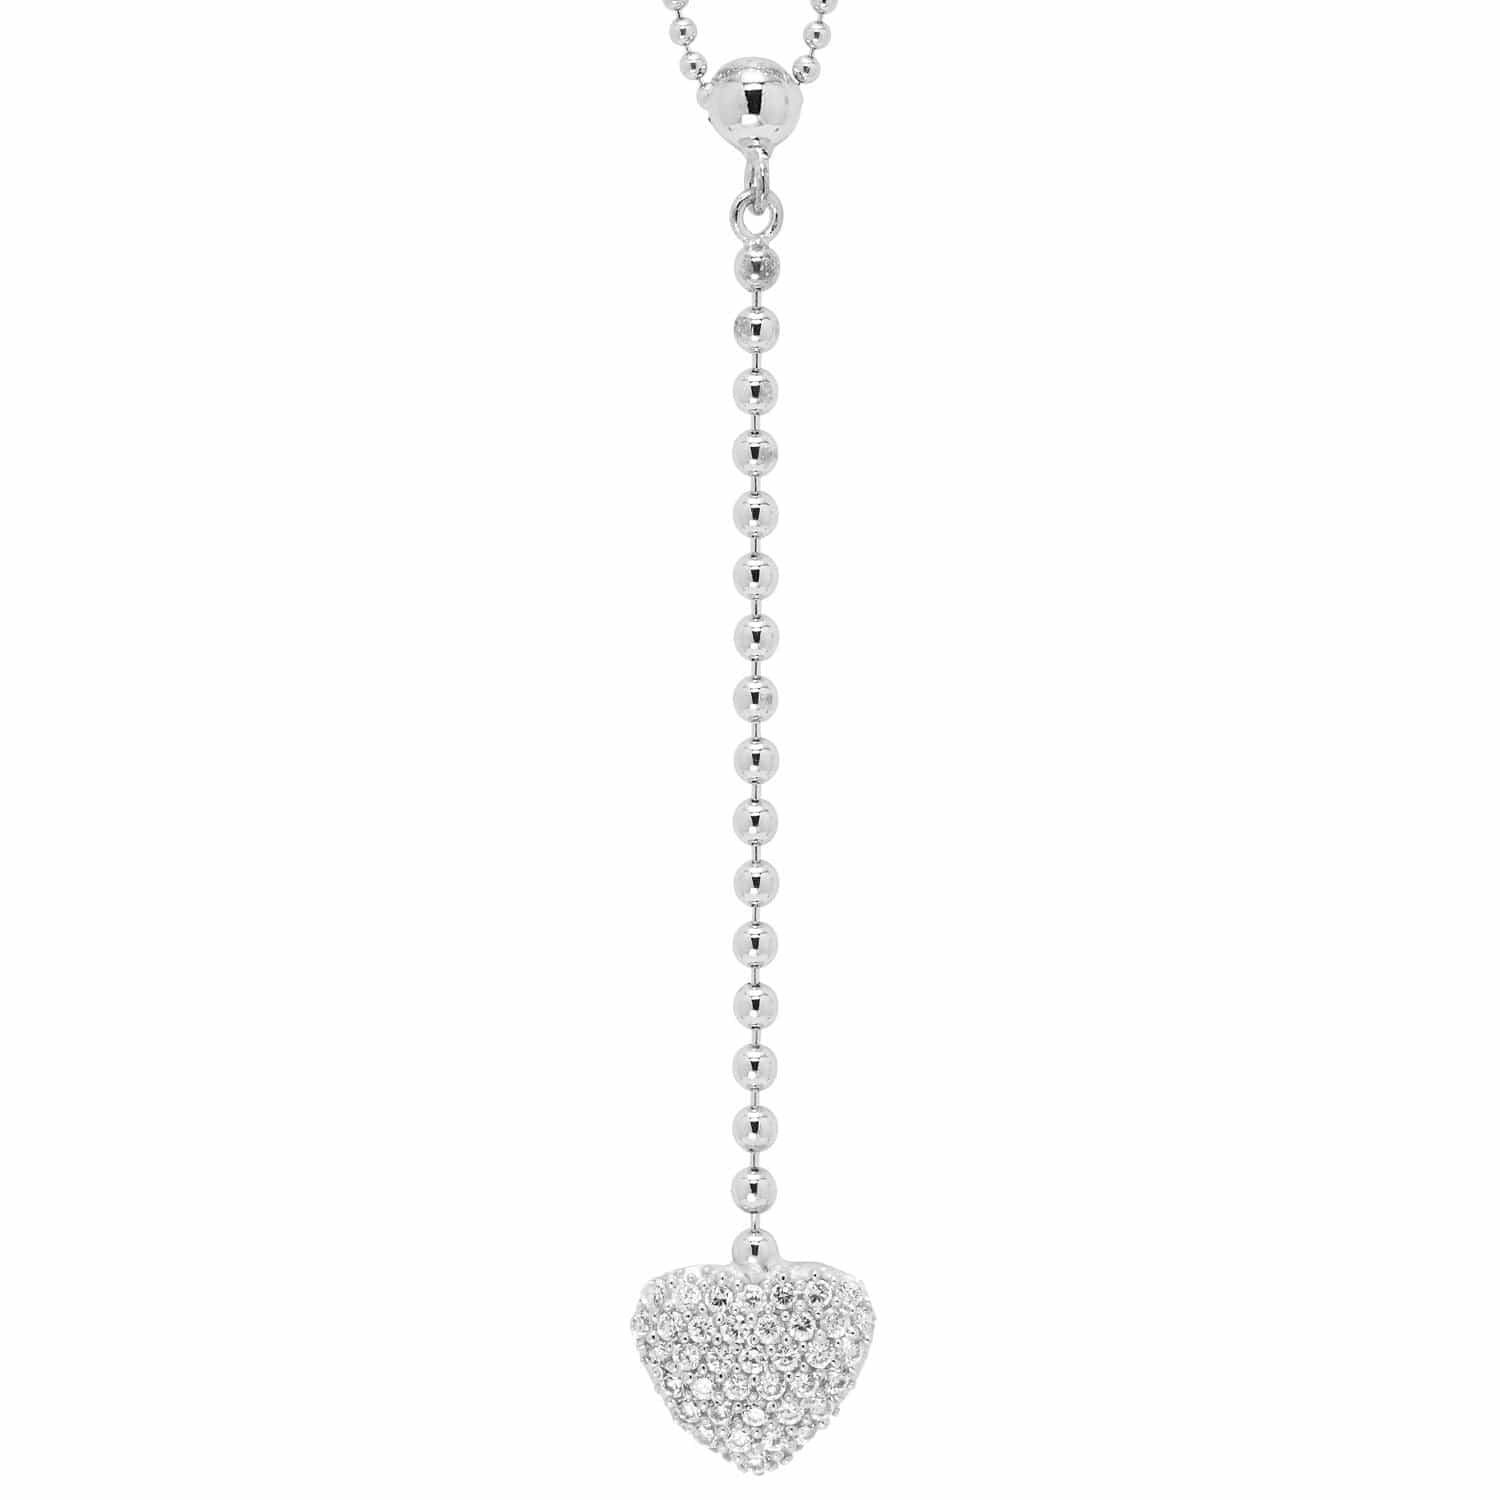 BW James Jewelers Necklace Heart Pendant